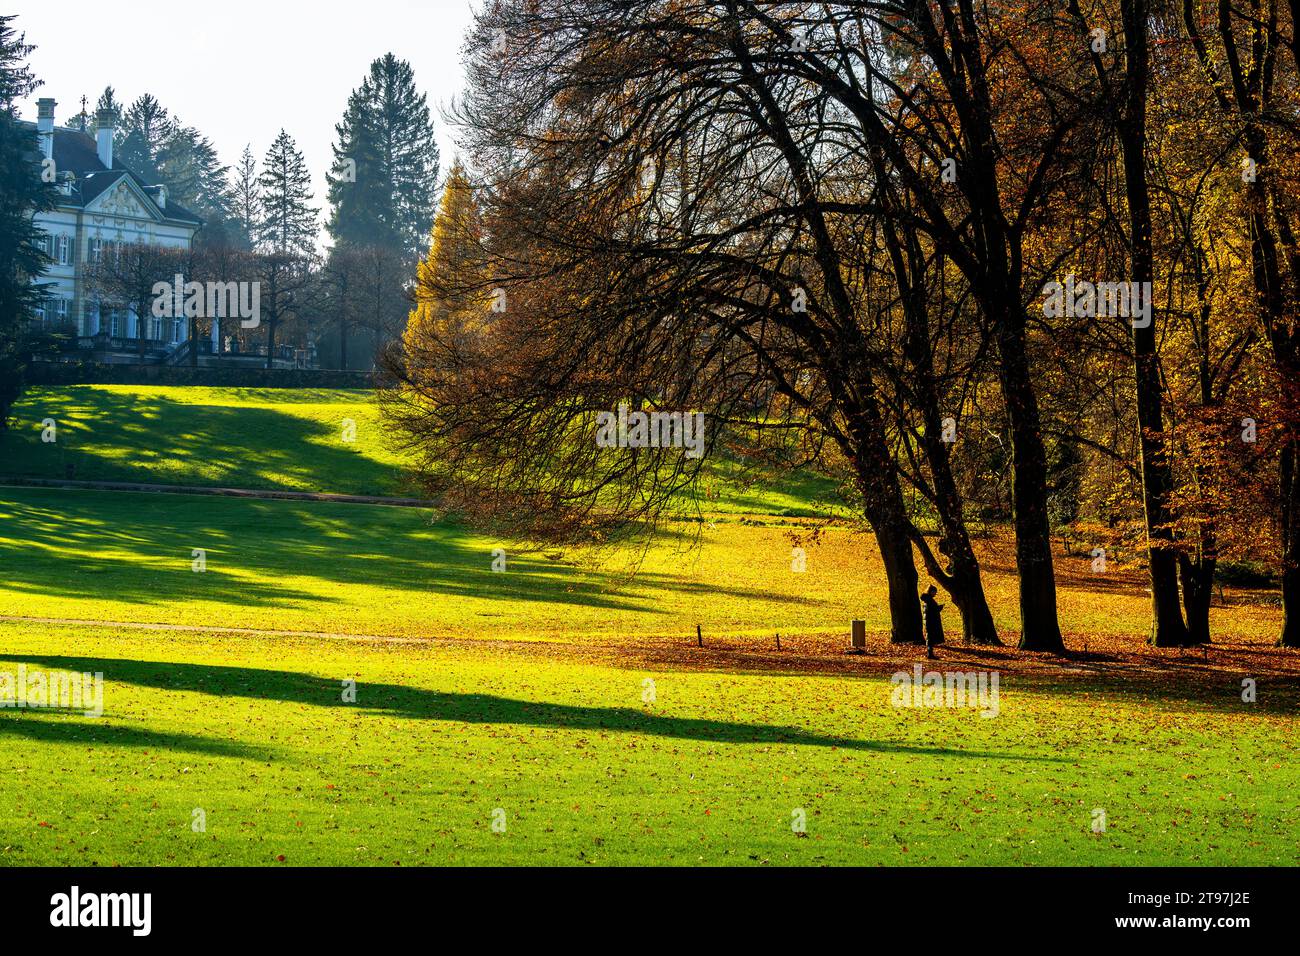 Fall Colours at Wenkenhof Park, Riehen, Canton of Basel-Stadt, Switzerland. Stock Photo